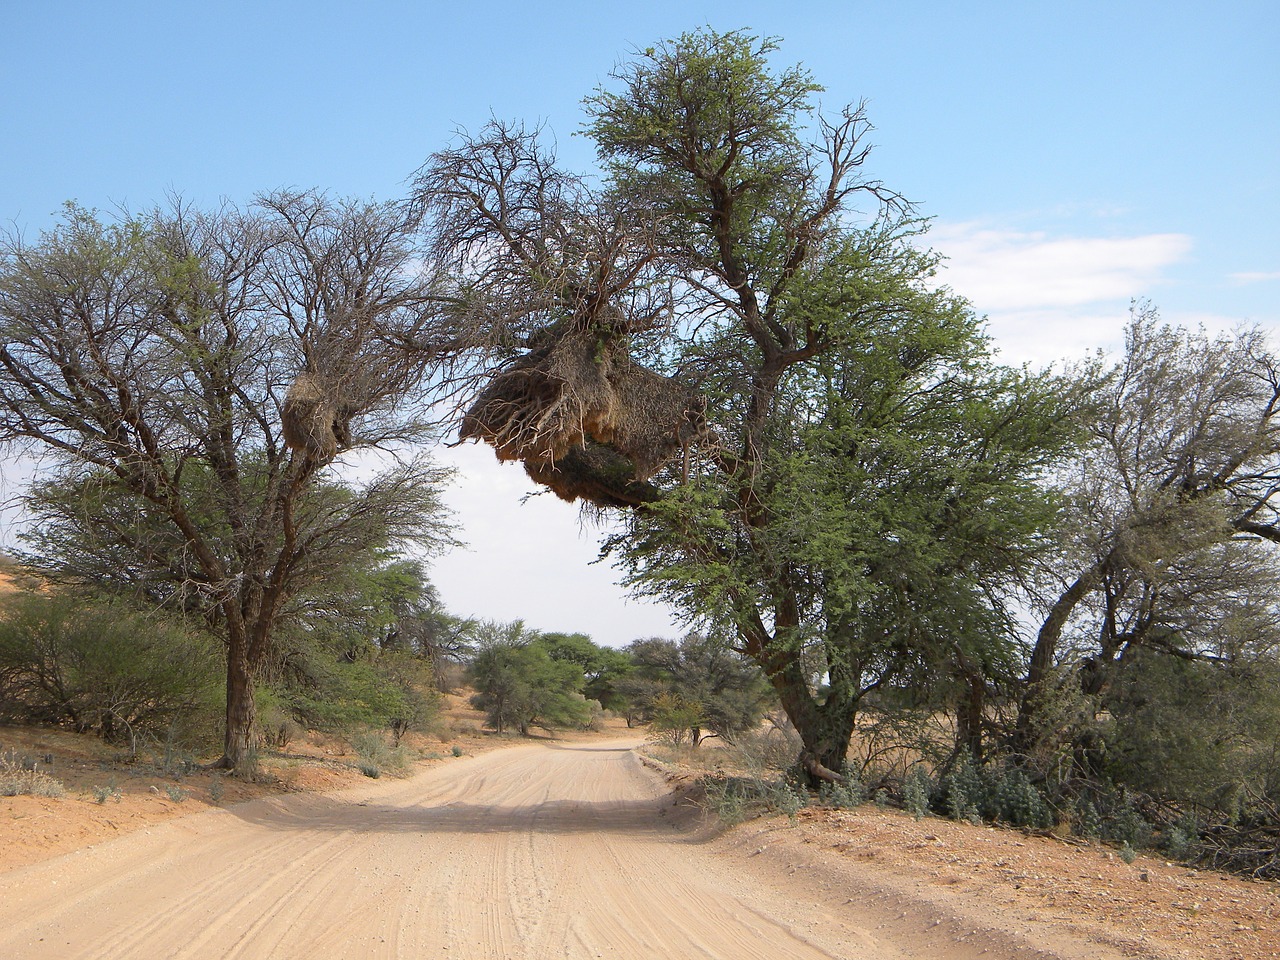 Kgalagadi Transfrontier, Parks in South Africa